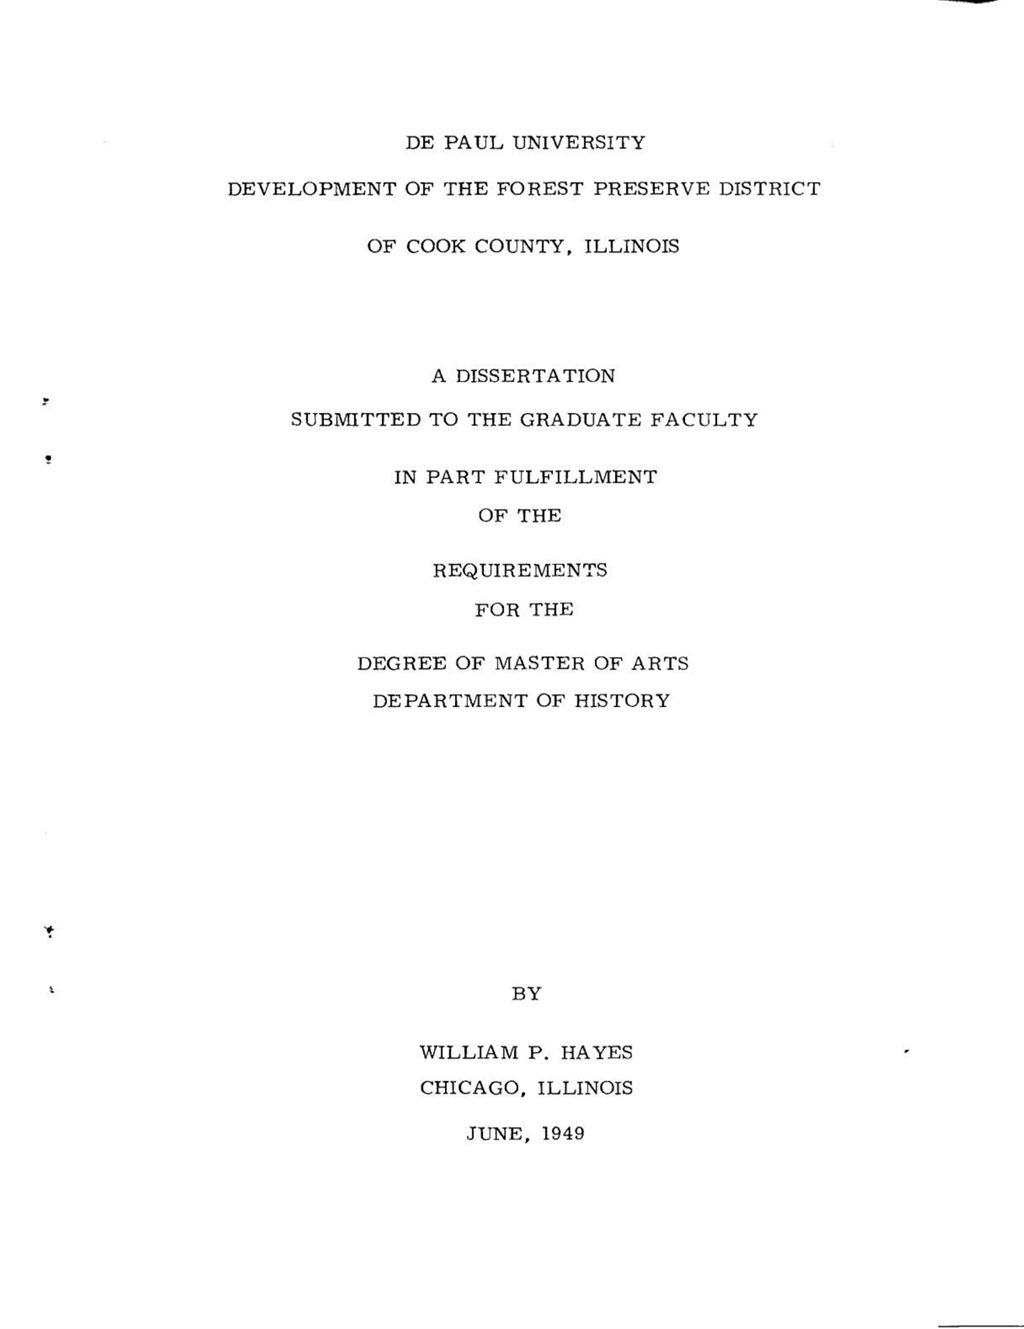 Miniature of Dissertation about Forest Preserves by William P. Hayes, 1949